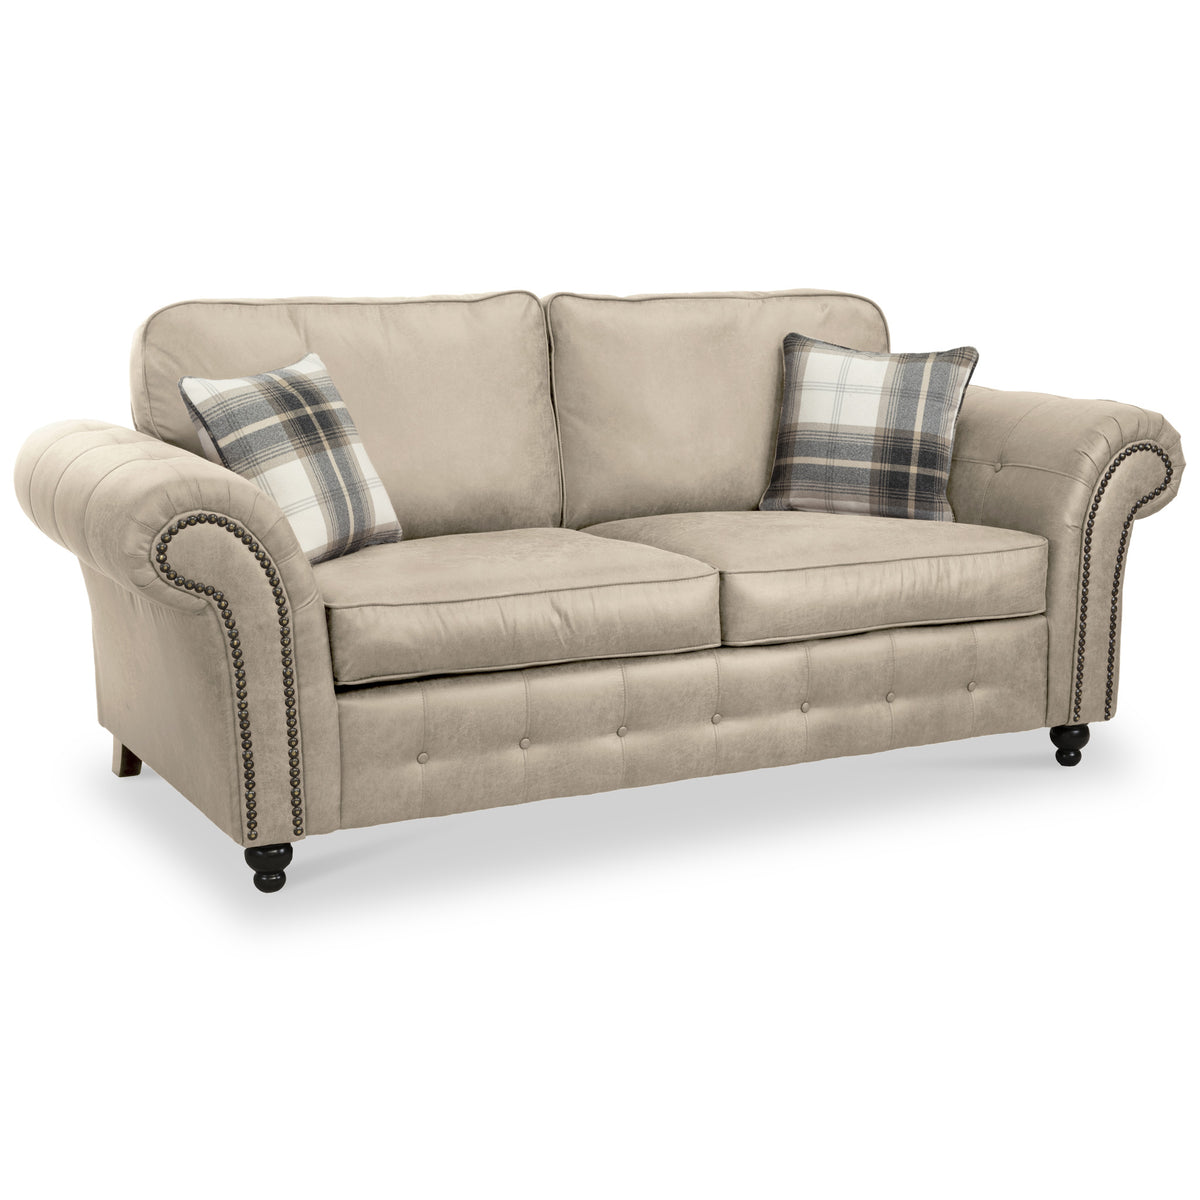 Edward Marble Faux Leather 3 Seater Sofa from Roseland Furniture